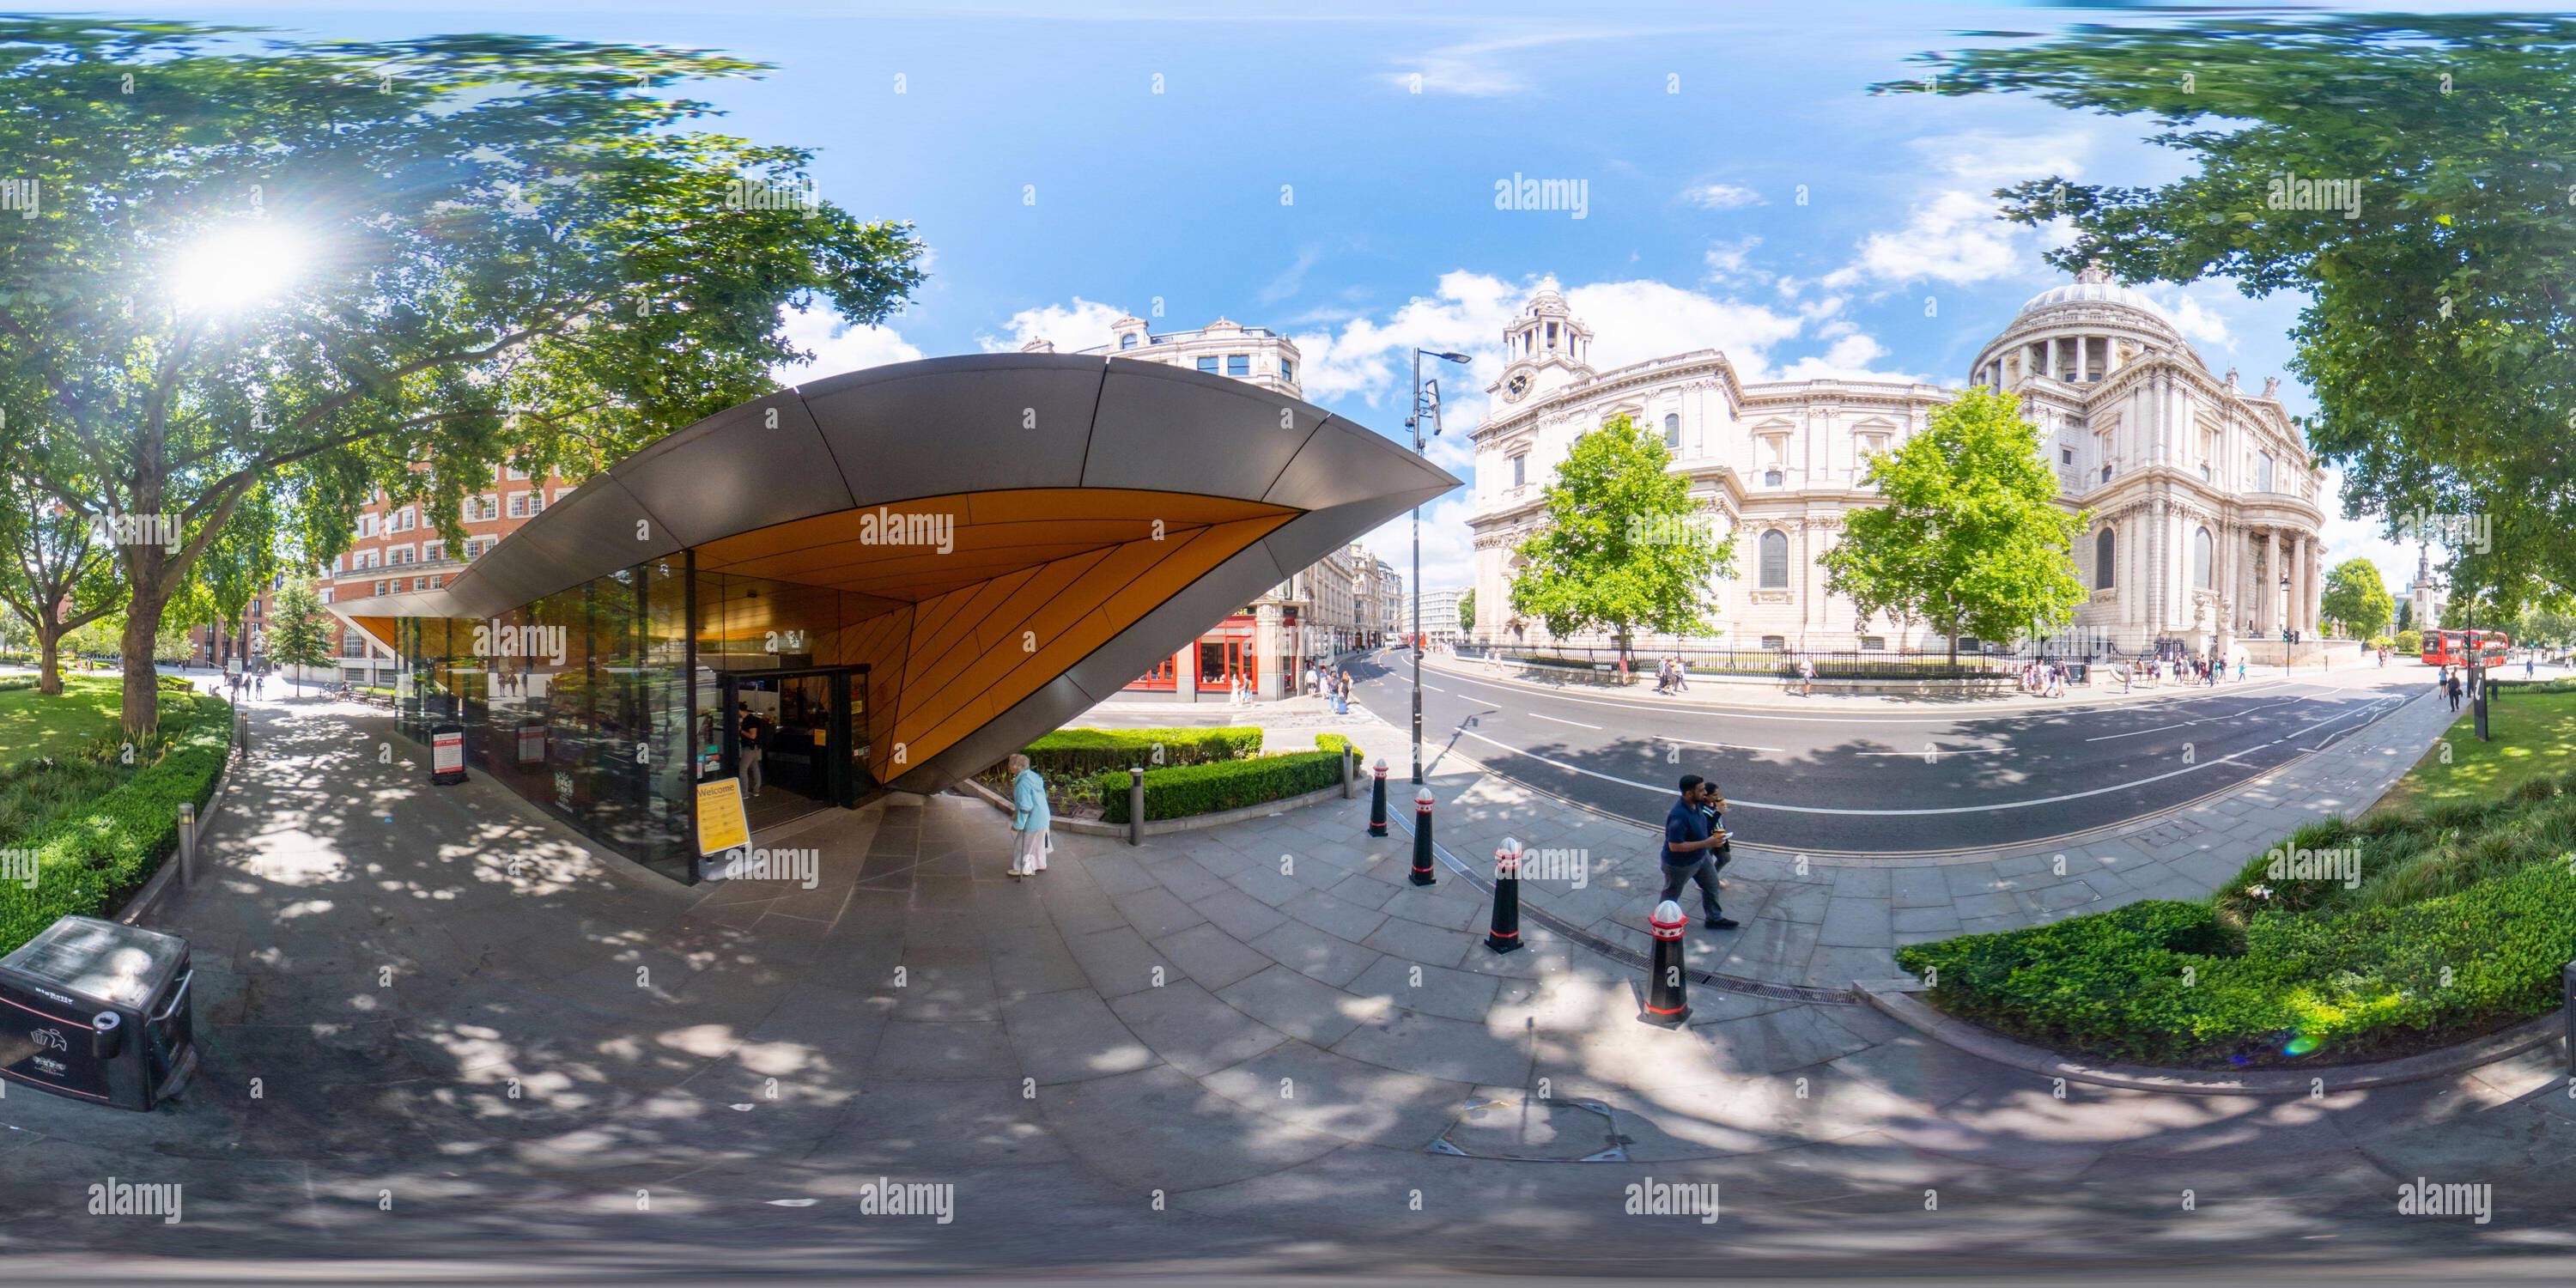 360 degree panoramic view of 360 photo City of London Information Centre